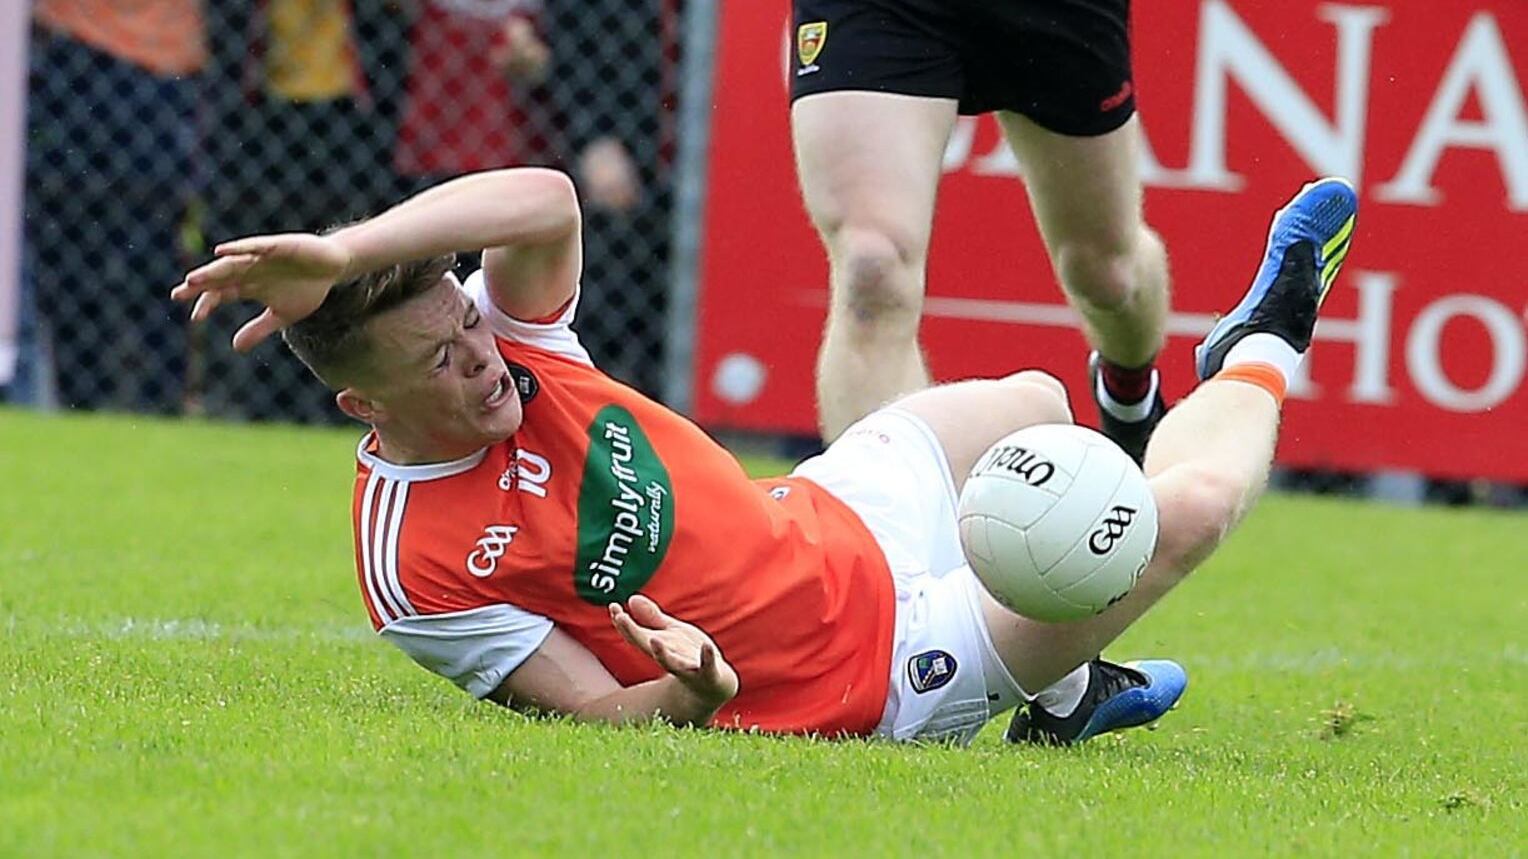 'I think we'll be strong opposition for anybody,' says Down forward Conor Maginn&nbsp;